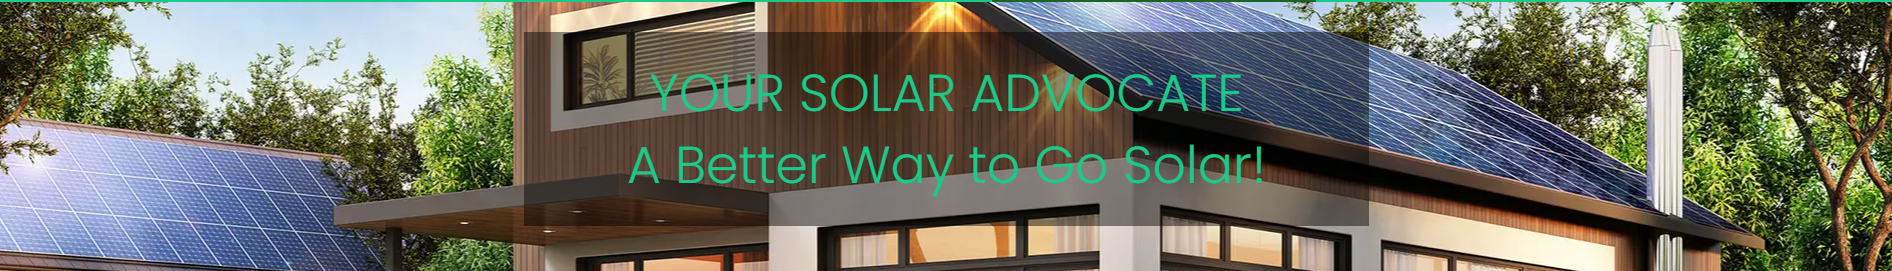 your-solar-advocate-a-better-way-to-go-solar